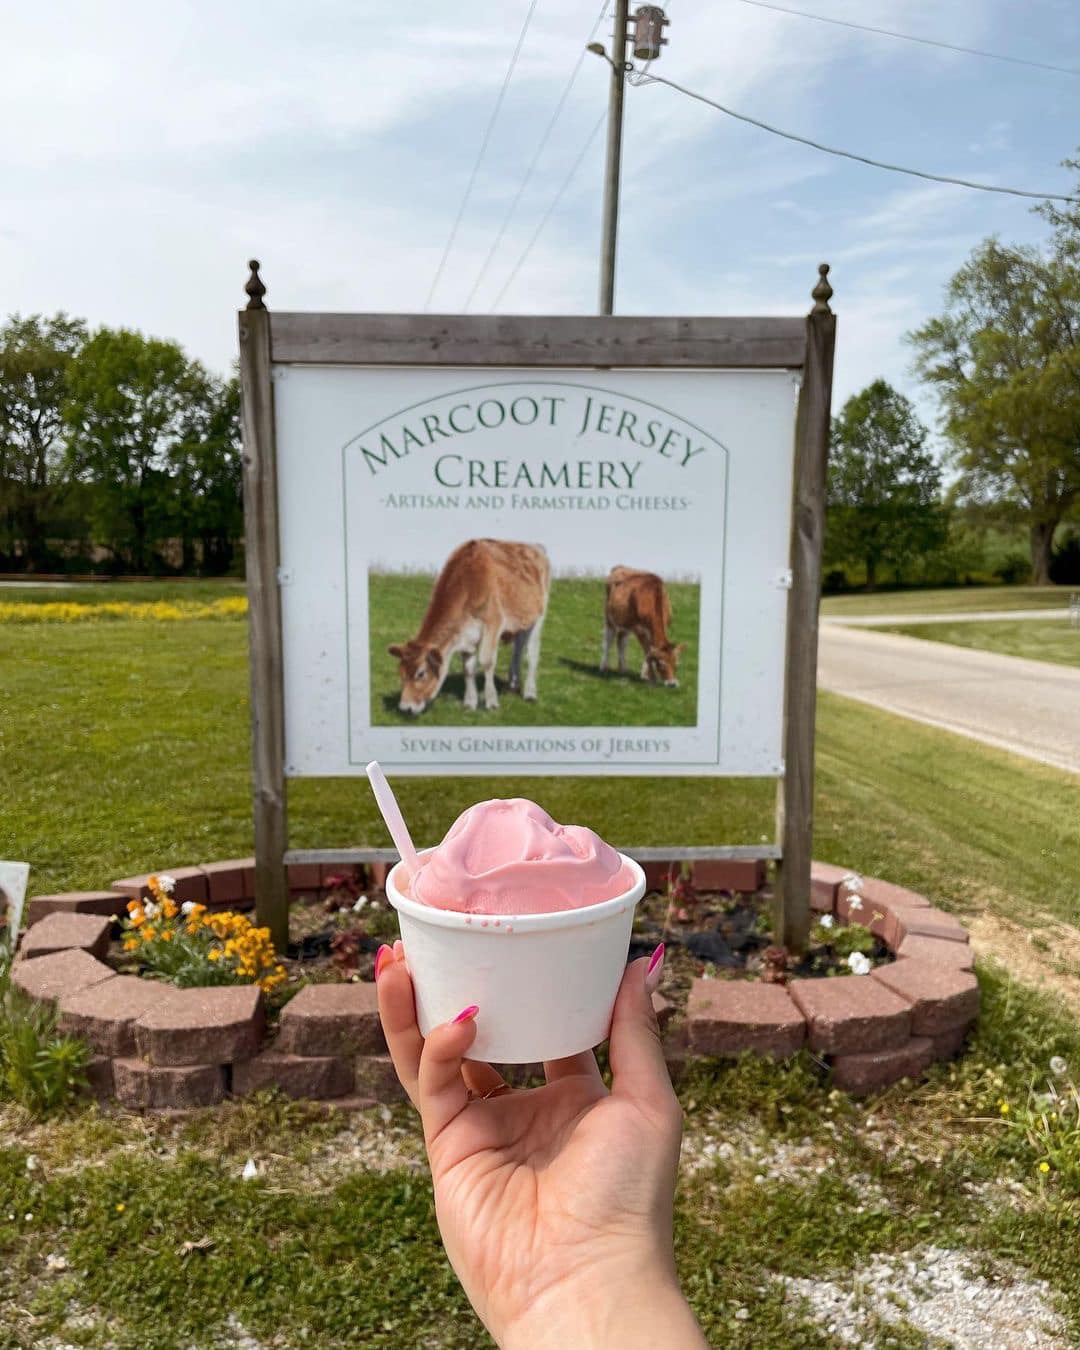 Photo credit: Marcoot Jersey Creamery in Greenville